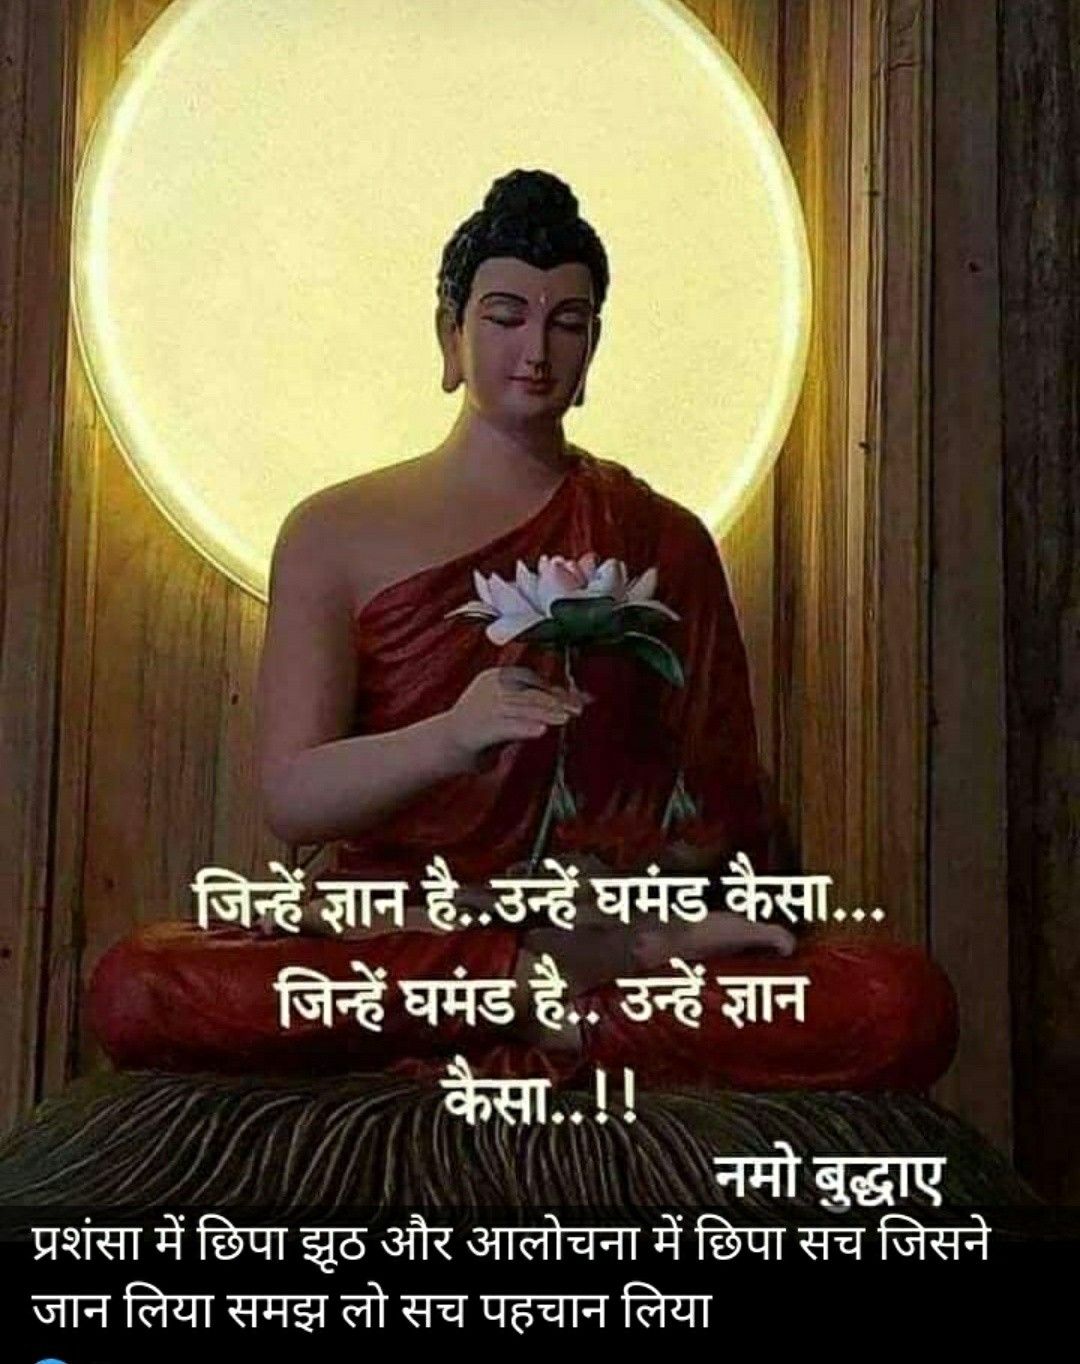 Buddha motivational quotes in hindi - from Gautam Buddha quotes in Hindi